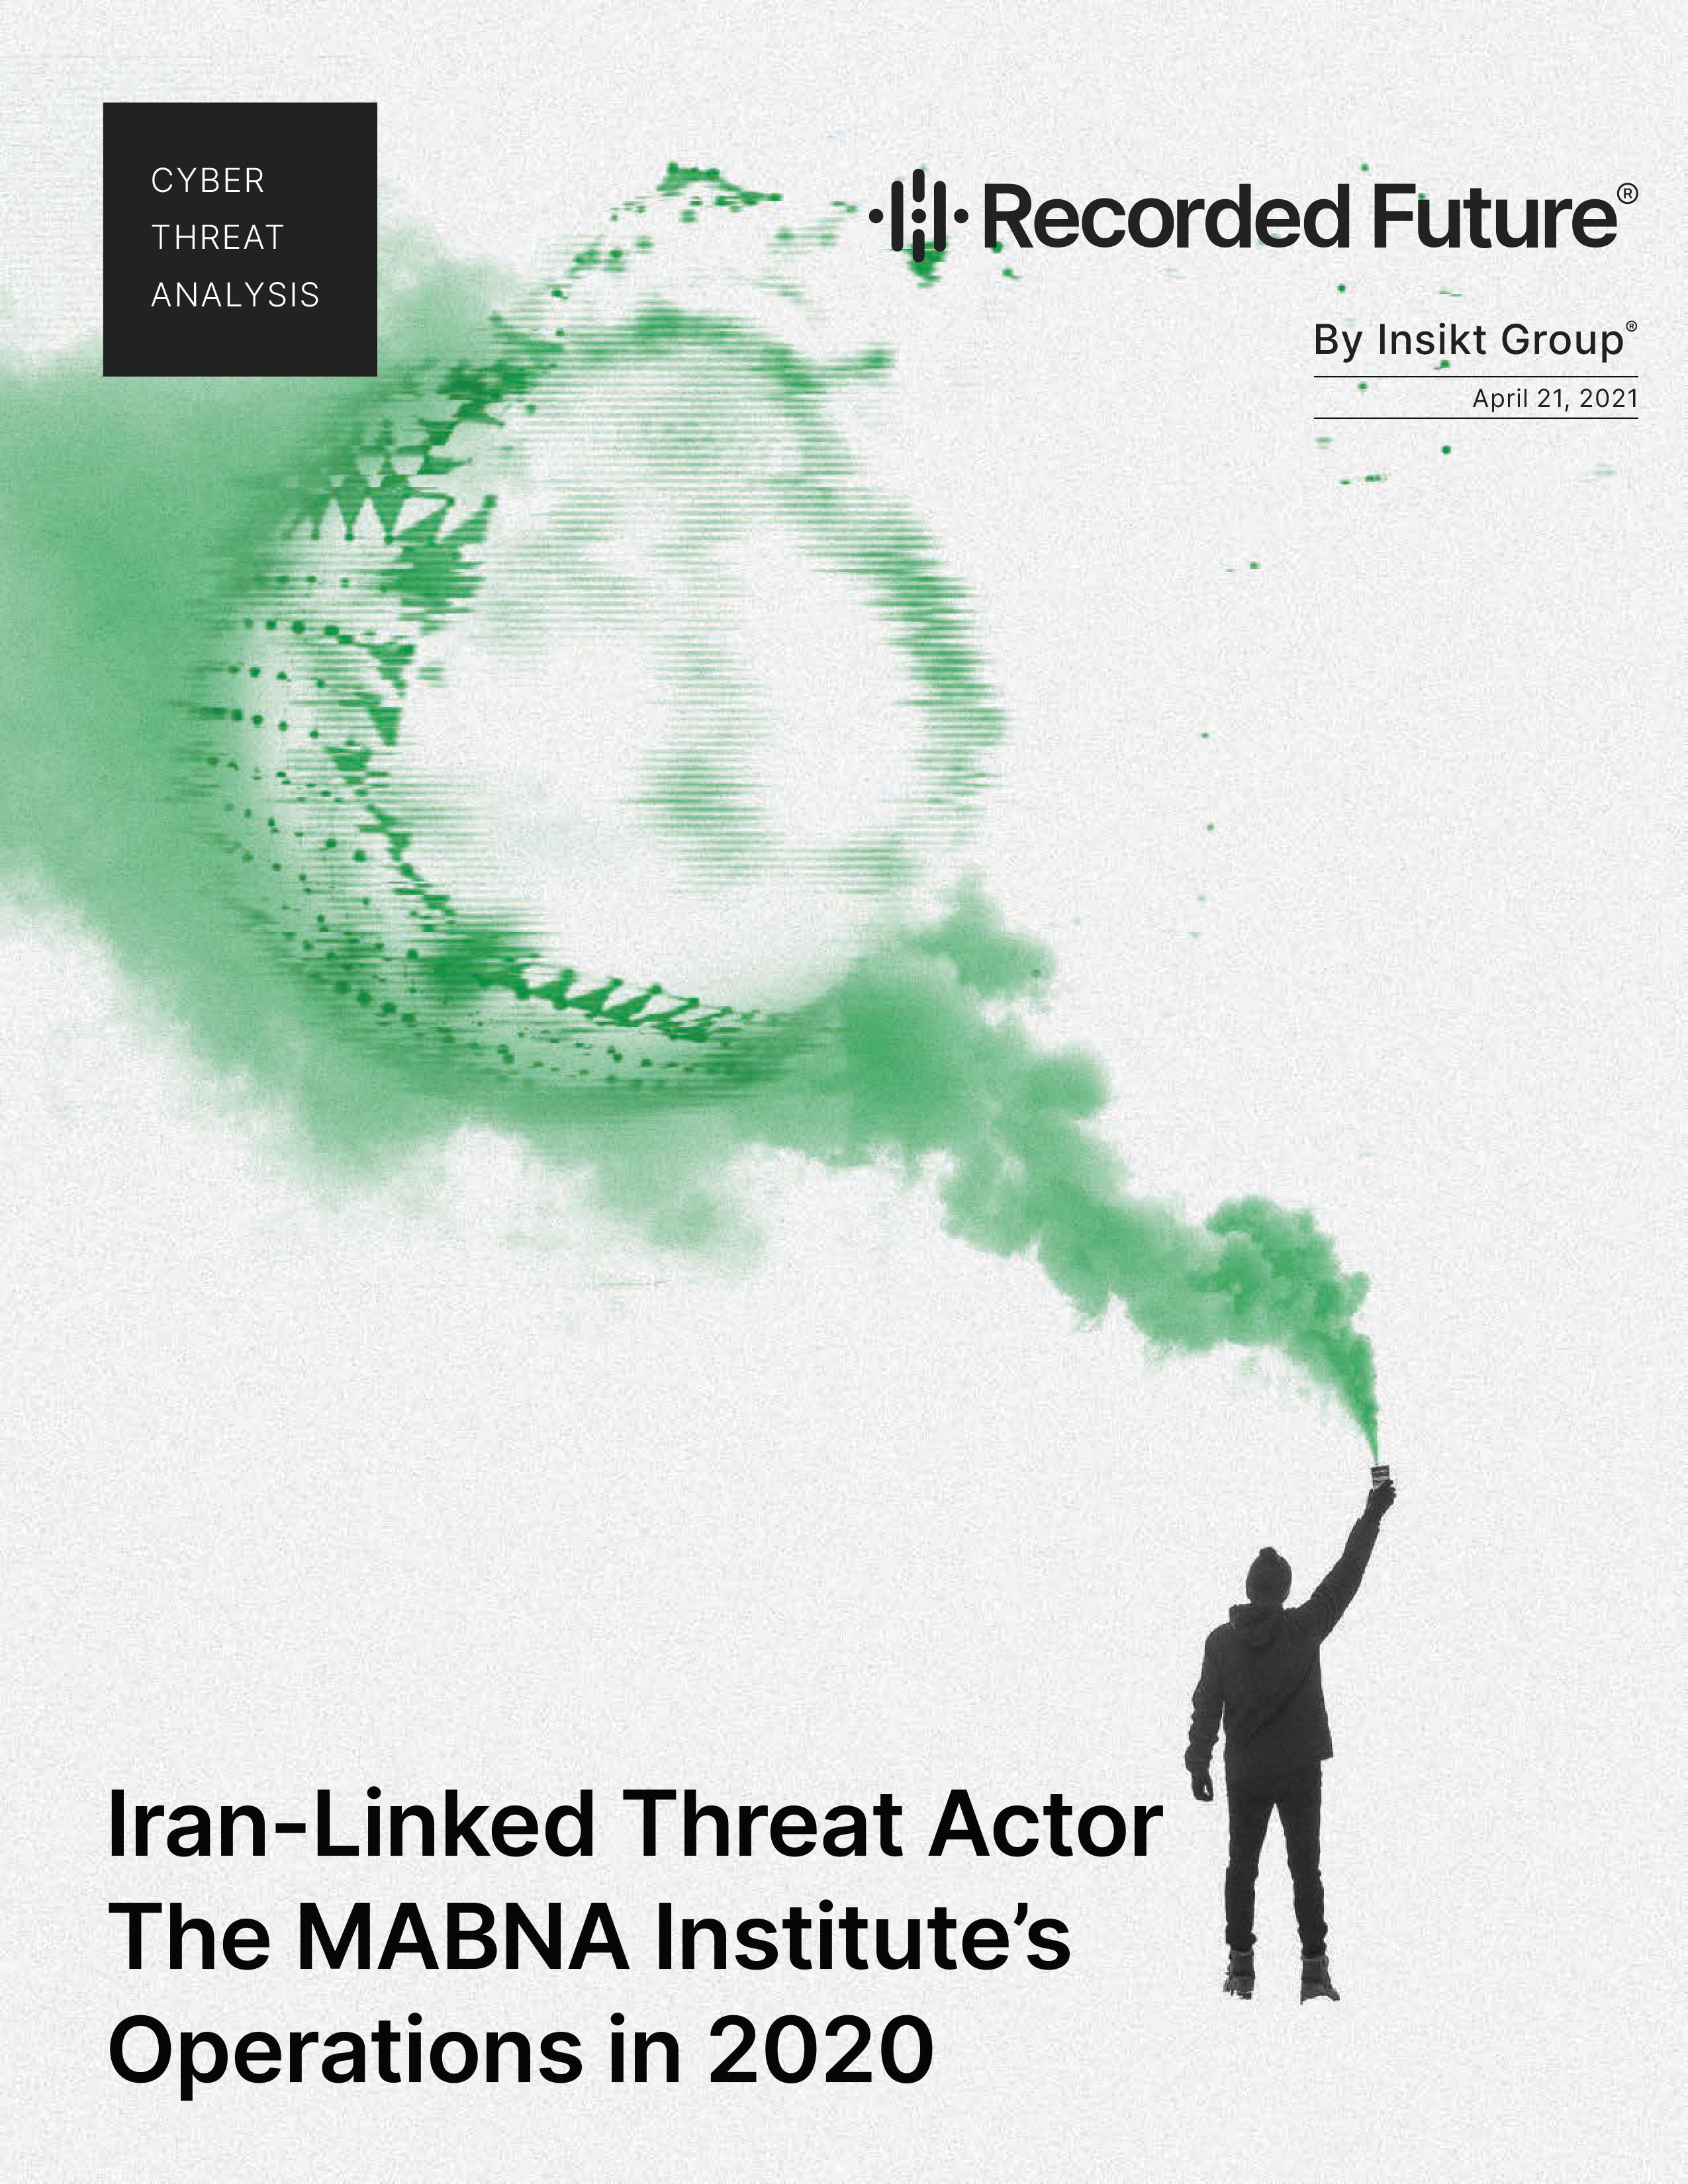 Iran-Linked Threat Actor The MABNA Institute’s Operations in 2020 Report